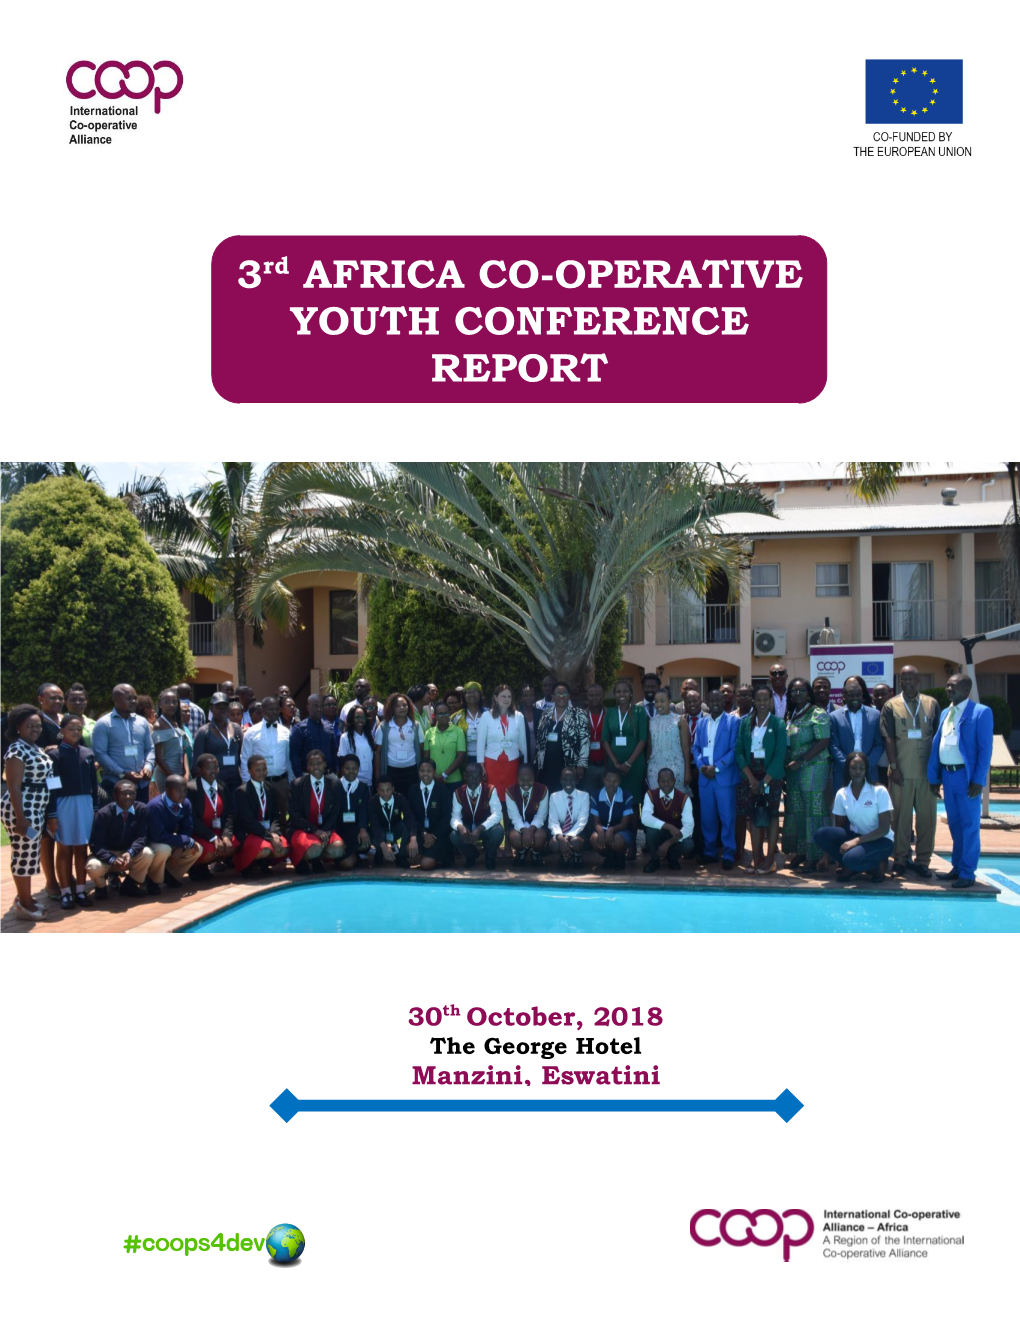 3Rd AFRICA CO-OPERATIVE YOUTH CONFERENCE REPORT